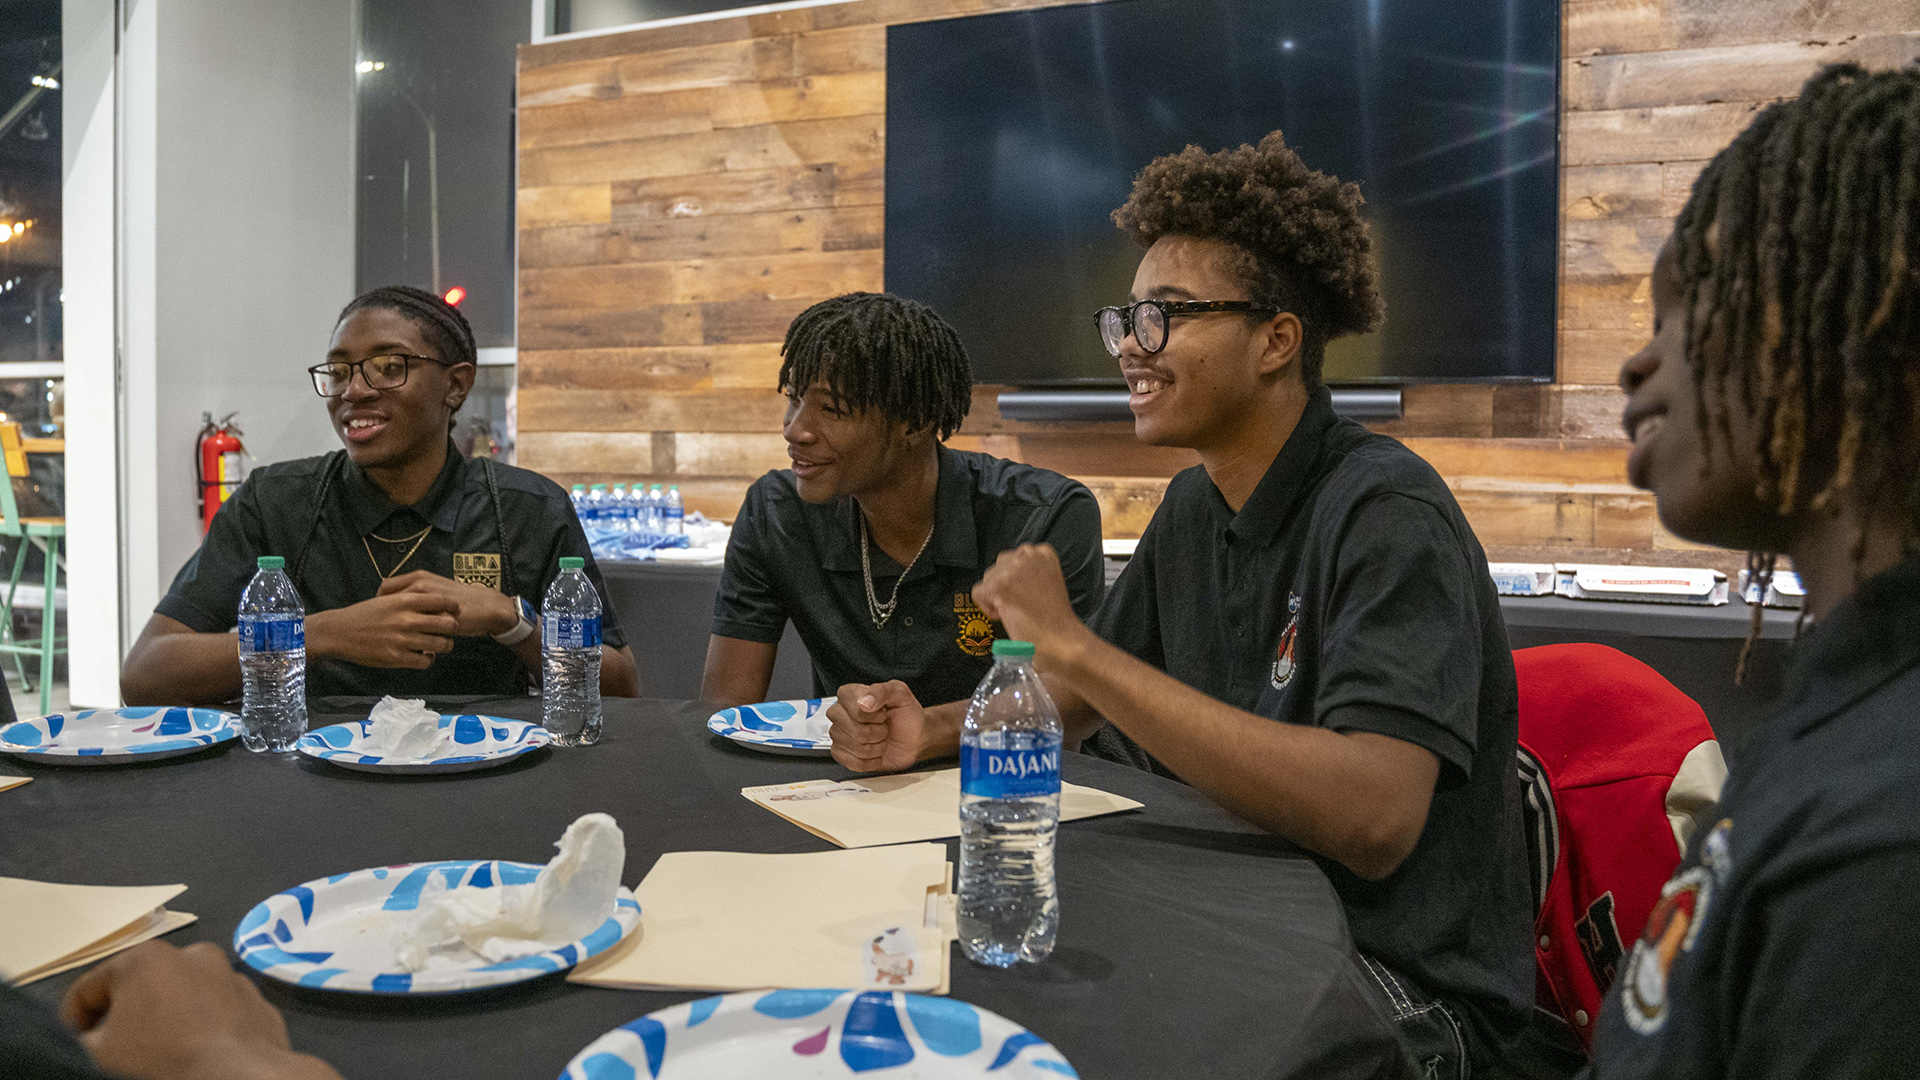 Four male students listen while sitting around one portion of a round table with water bottles and empty paper plates on its surface, in a room with a large monitor mounted on a wall with reclaimed wood paneling in front of plate-glass windows.